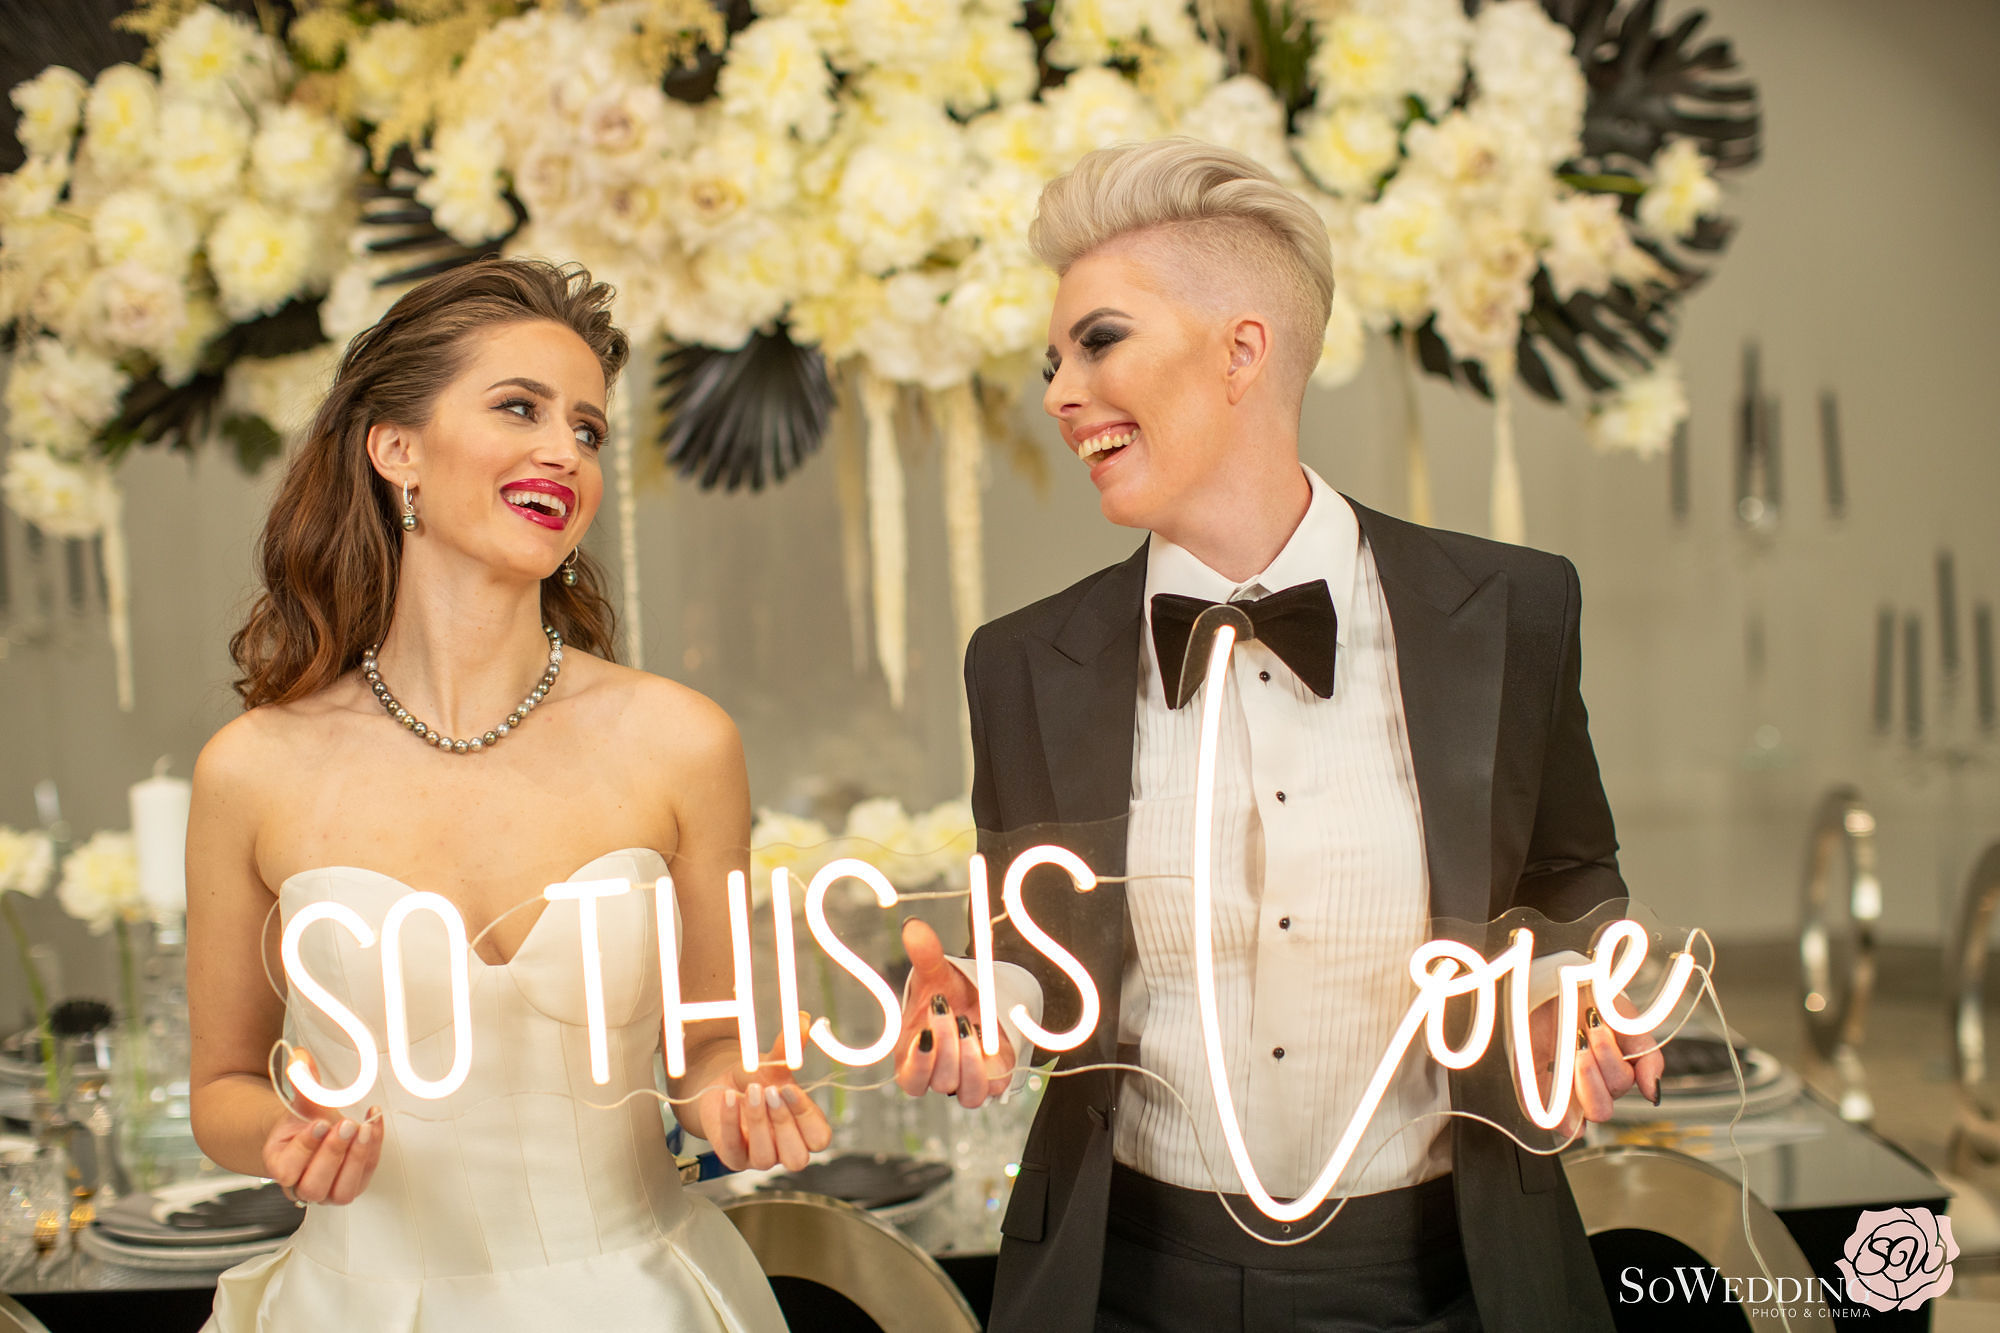 WedLuxe Style File: New York I Love You   "So This is Love"